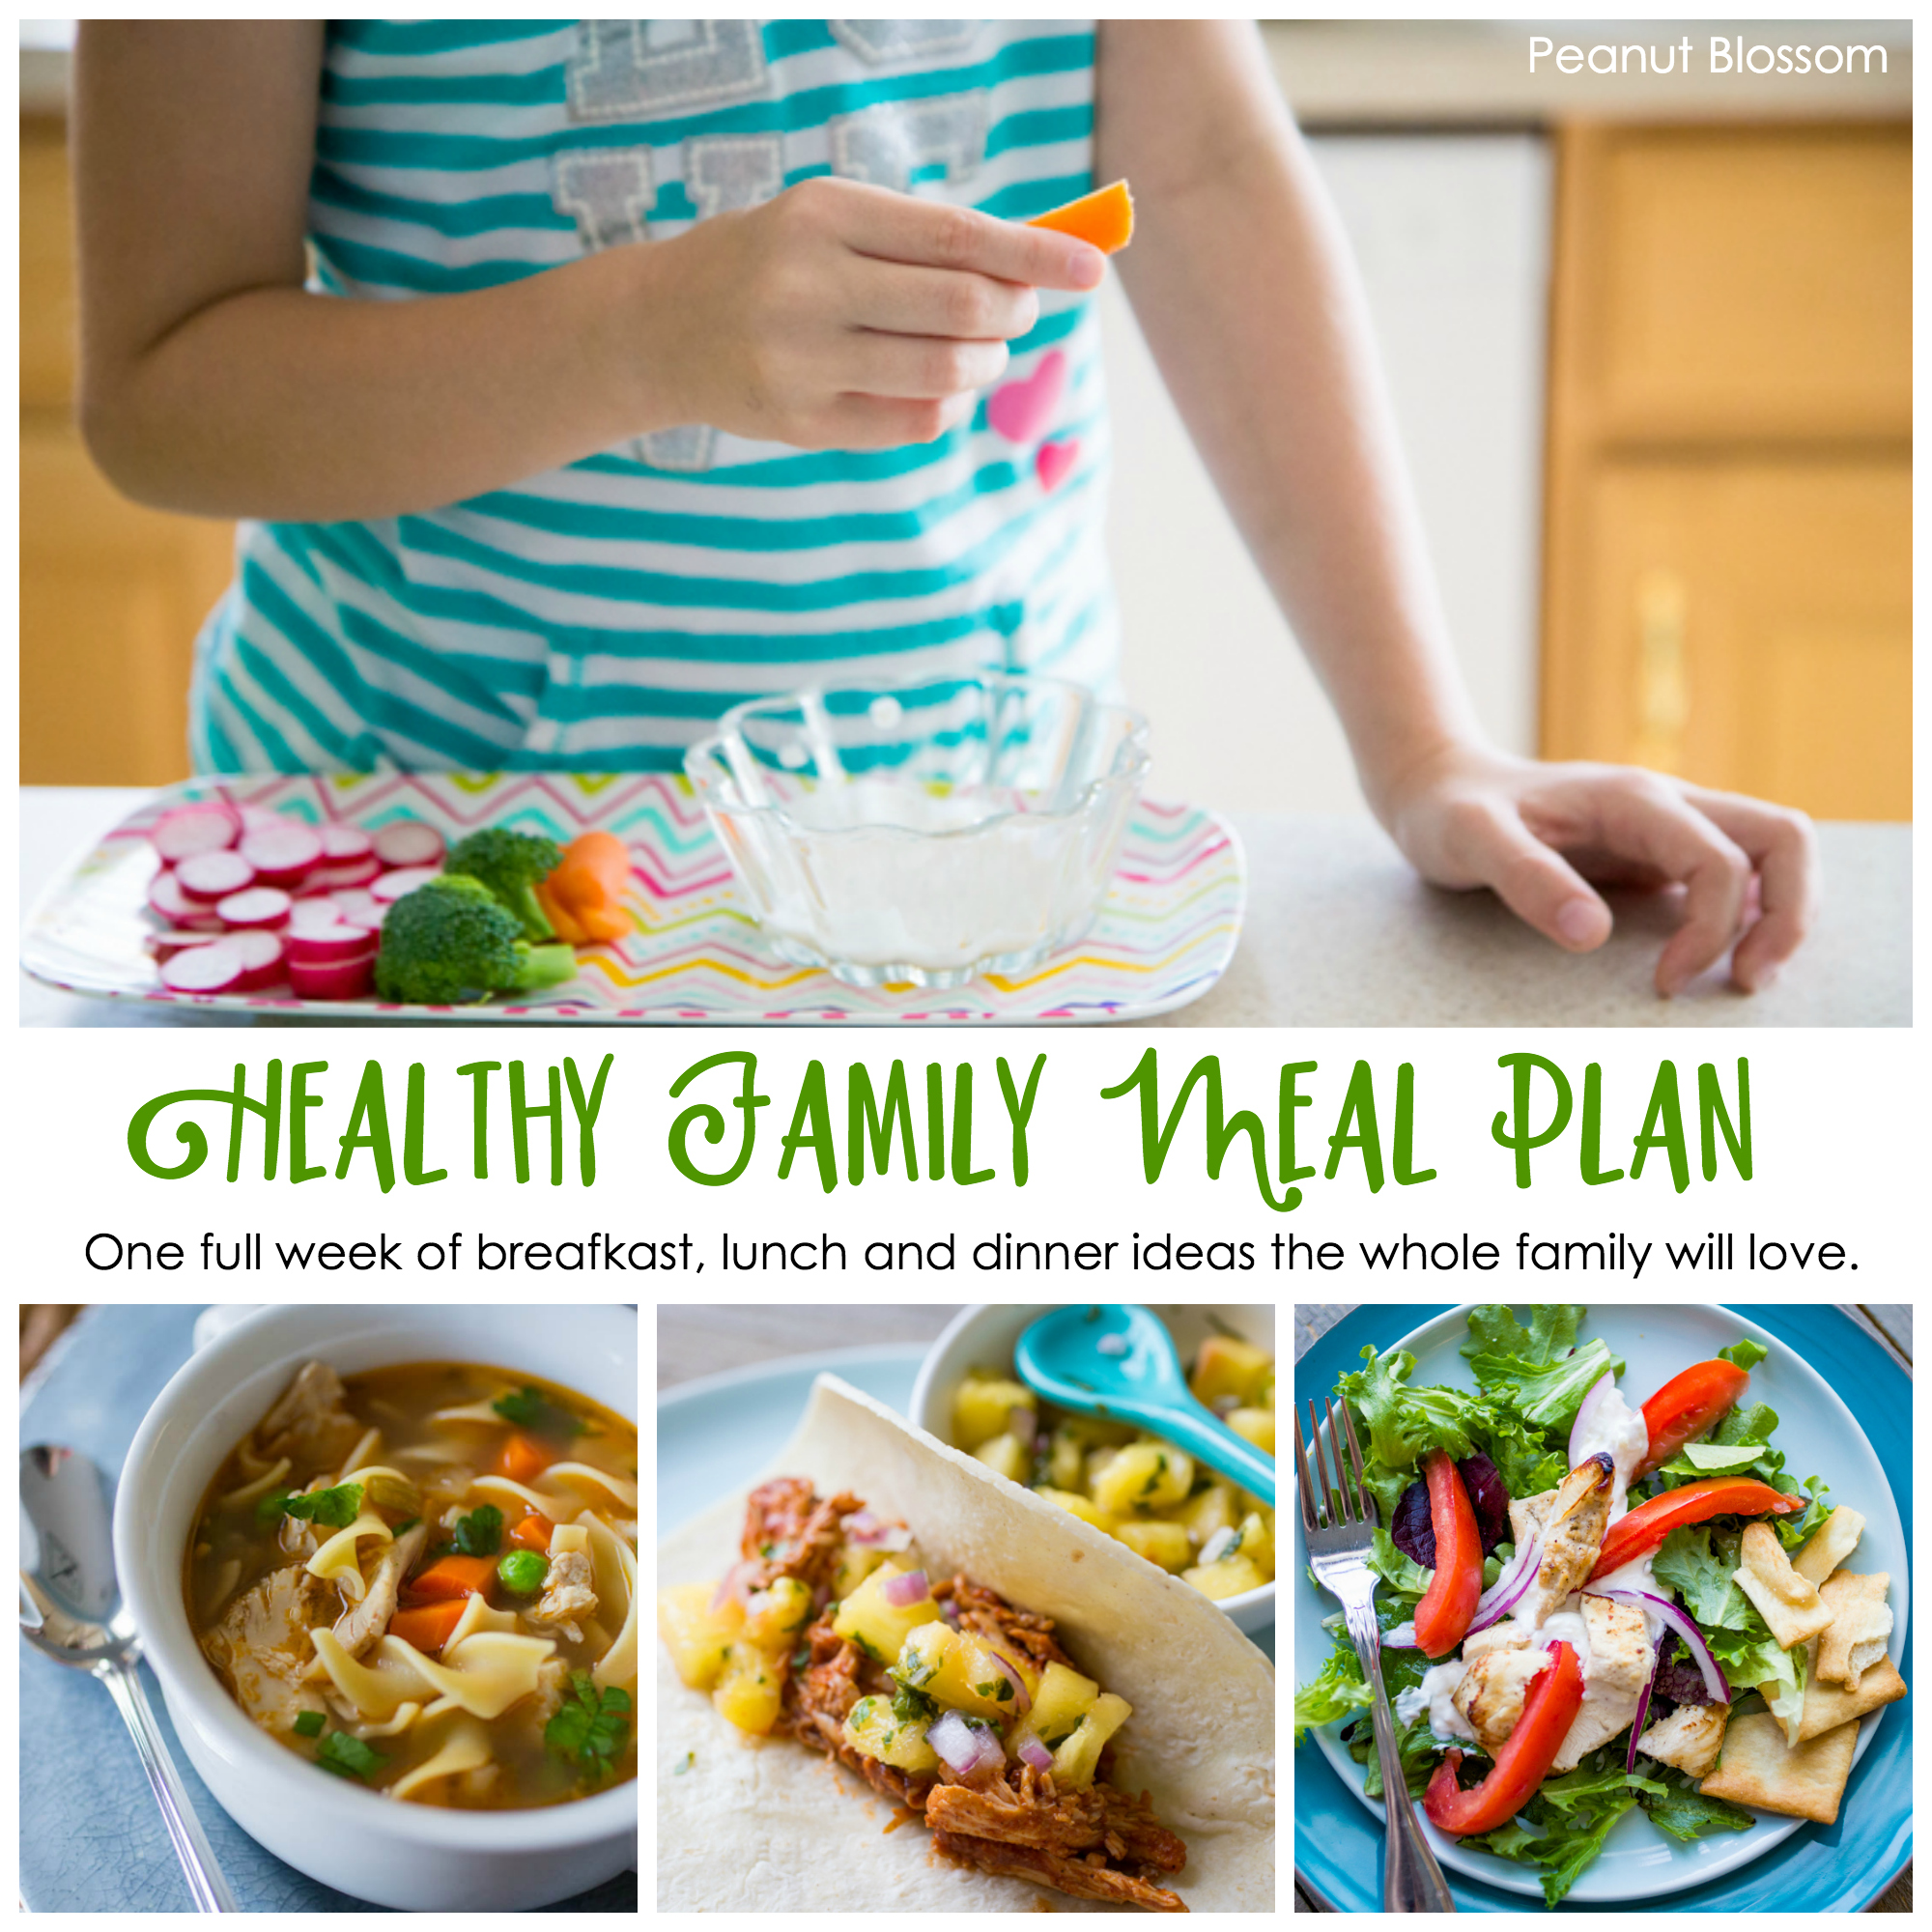 21 Day Fix Meal Plan for the Whole Family - Peanut Blossom